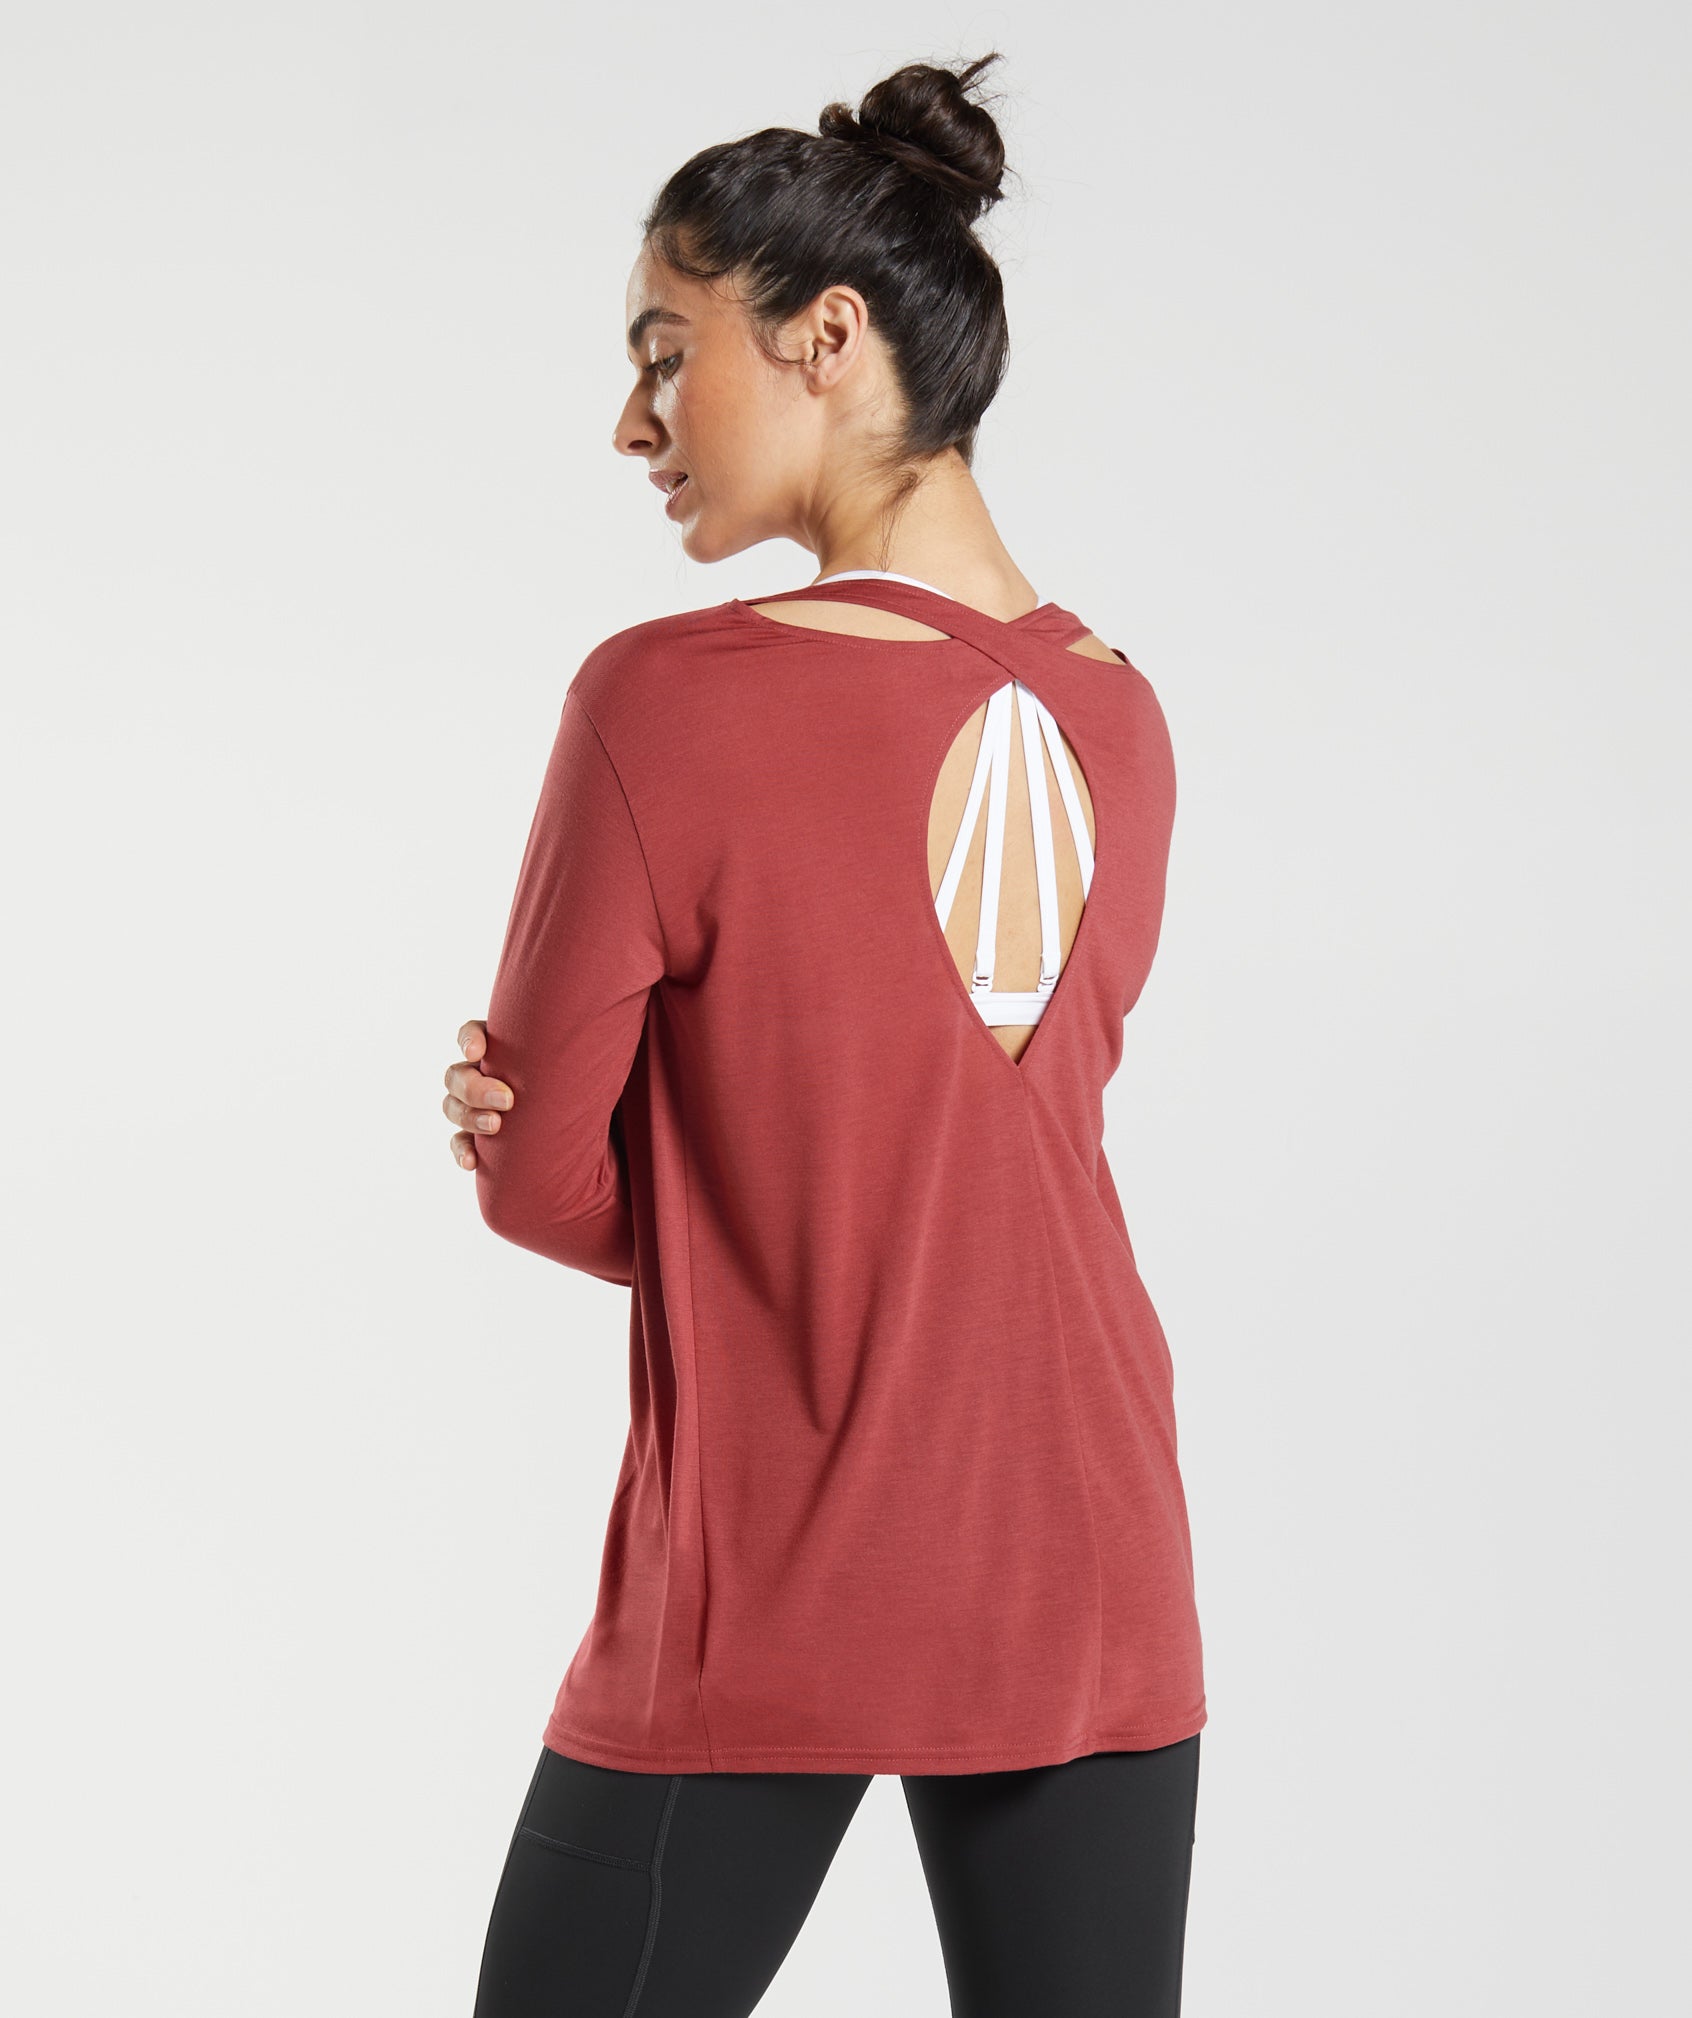 Super Soft Cut-Out Long Sleeve Top in Pomegranate Red